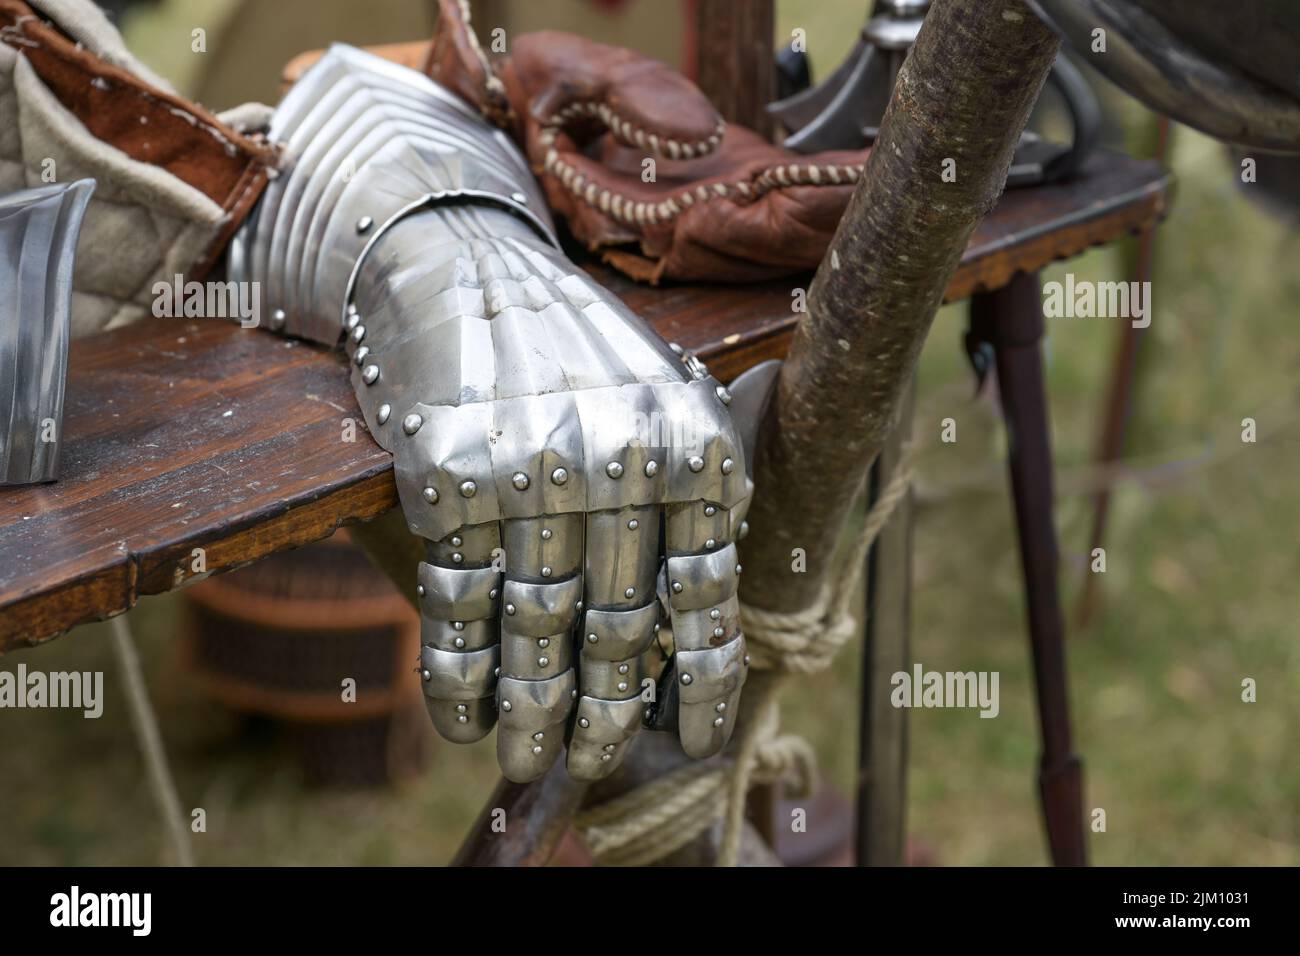 https://c8.alamy.com/comp/2JM1031/protective-gauntlet-from-metal-plates-as-fully-fingered-glove-part-of-a-historical-knight-armor-replica-at-a-medieval-festival-copy-space-selected-2JM1031.jpg